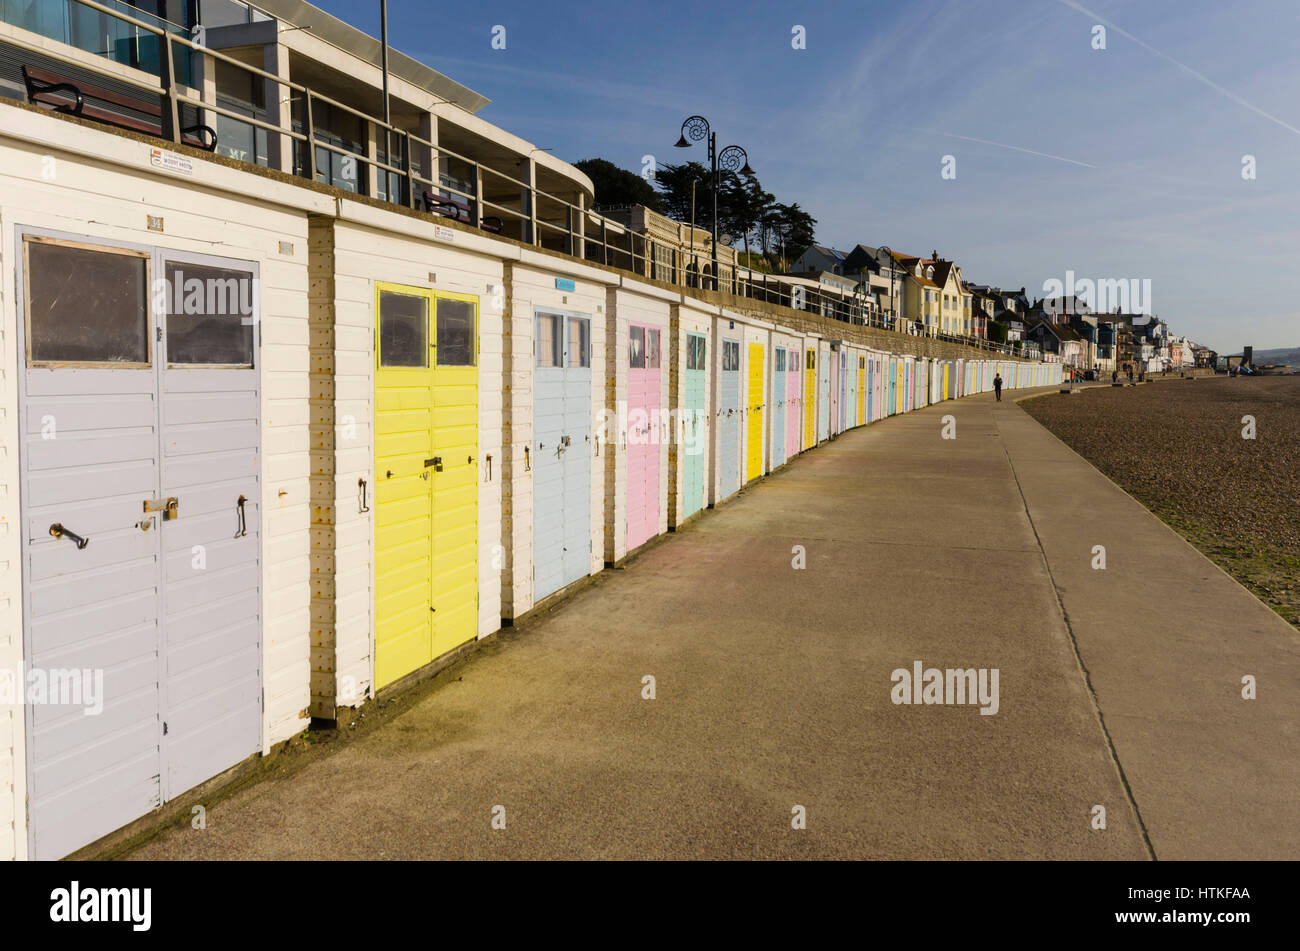 Lyme Regis, Dorset, UK.  13th March 2017.  UK Weather. Beautiful warm spring sunshine and blues skies during the morning at the seaside resort of Lyme Regis on the Dorset Jurassic Coast.  The view is of the seafront beach huts on Marine Parade.  Photo by Graham Hunt/Alamy Live News Stock Photo